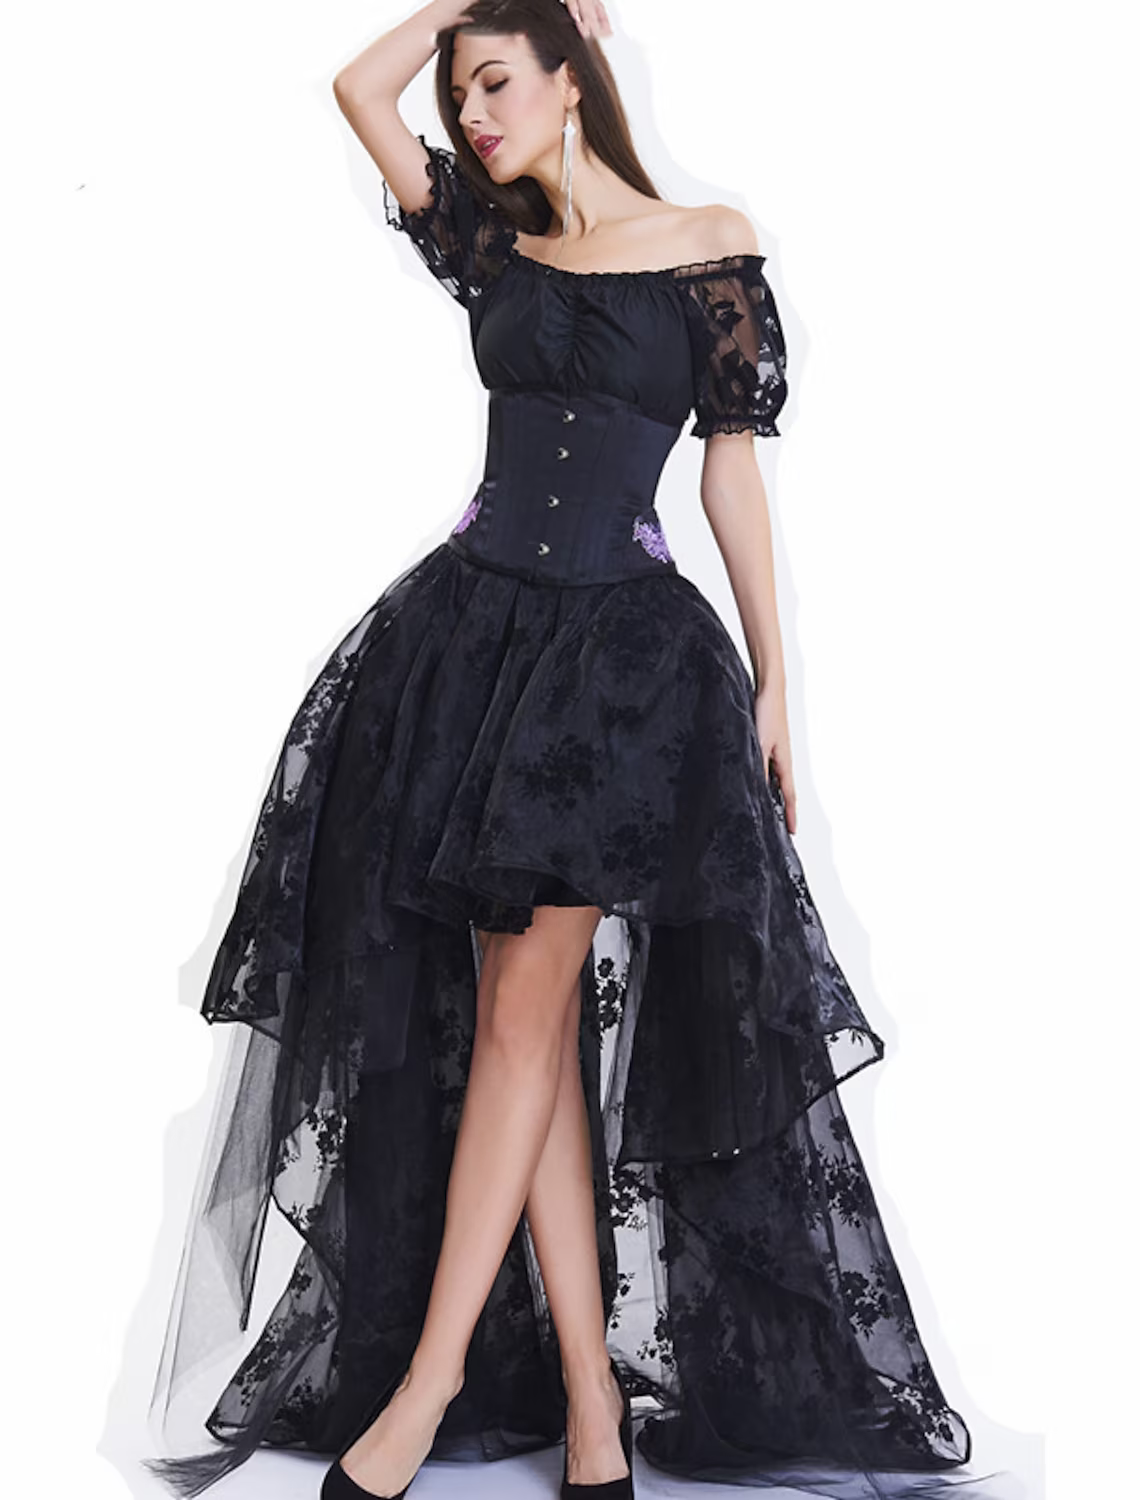 A-Line Prom Dresses Vintage Dress Asymmetrical Short Sleeve Off Shoulder Lace with Embroidery Appliques